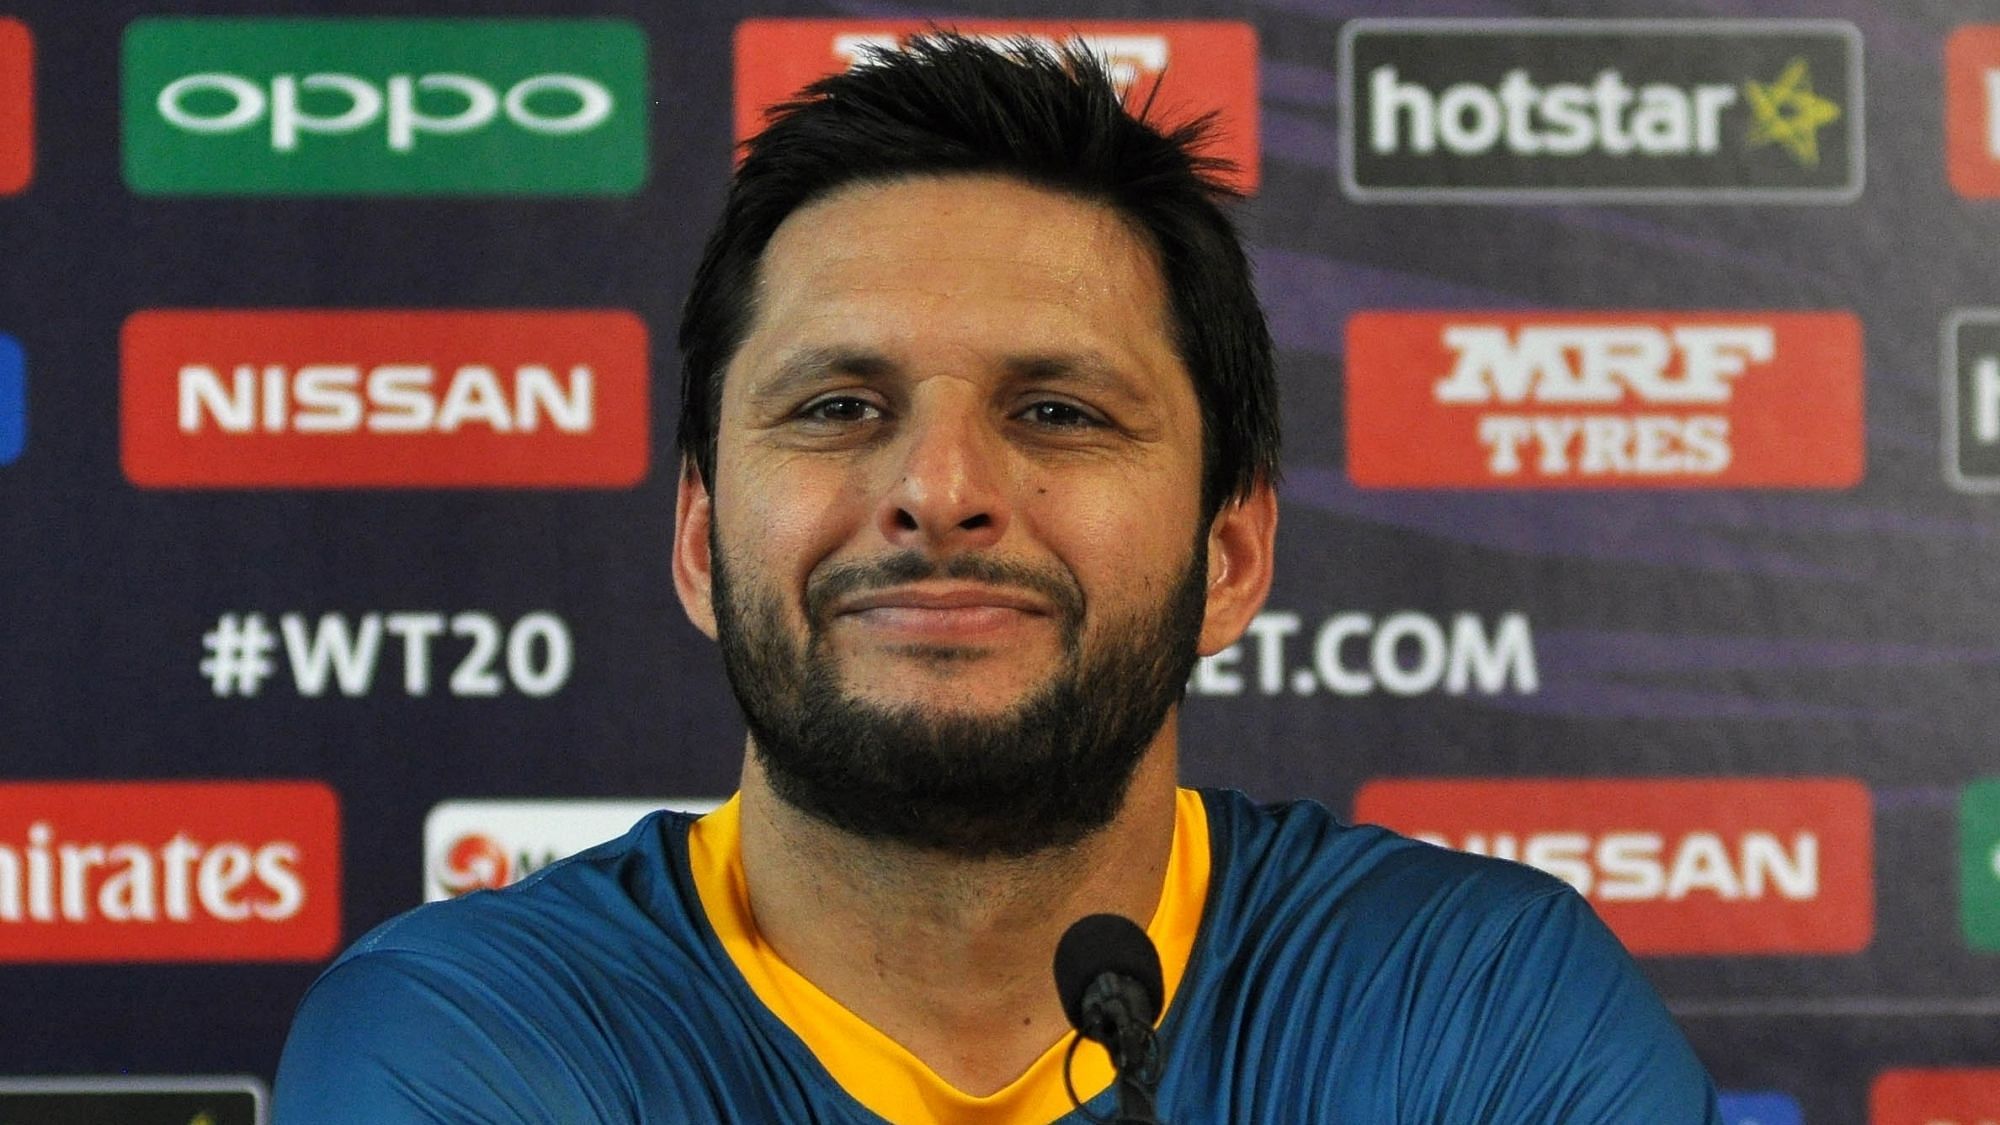 Shahid Afridi called for the UN’s intervention after Indian scrapped Article 370 of the Constitution.